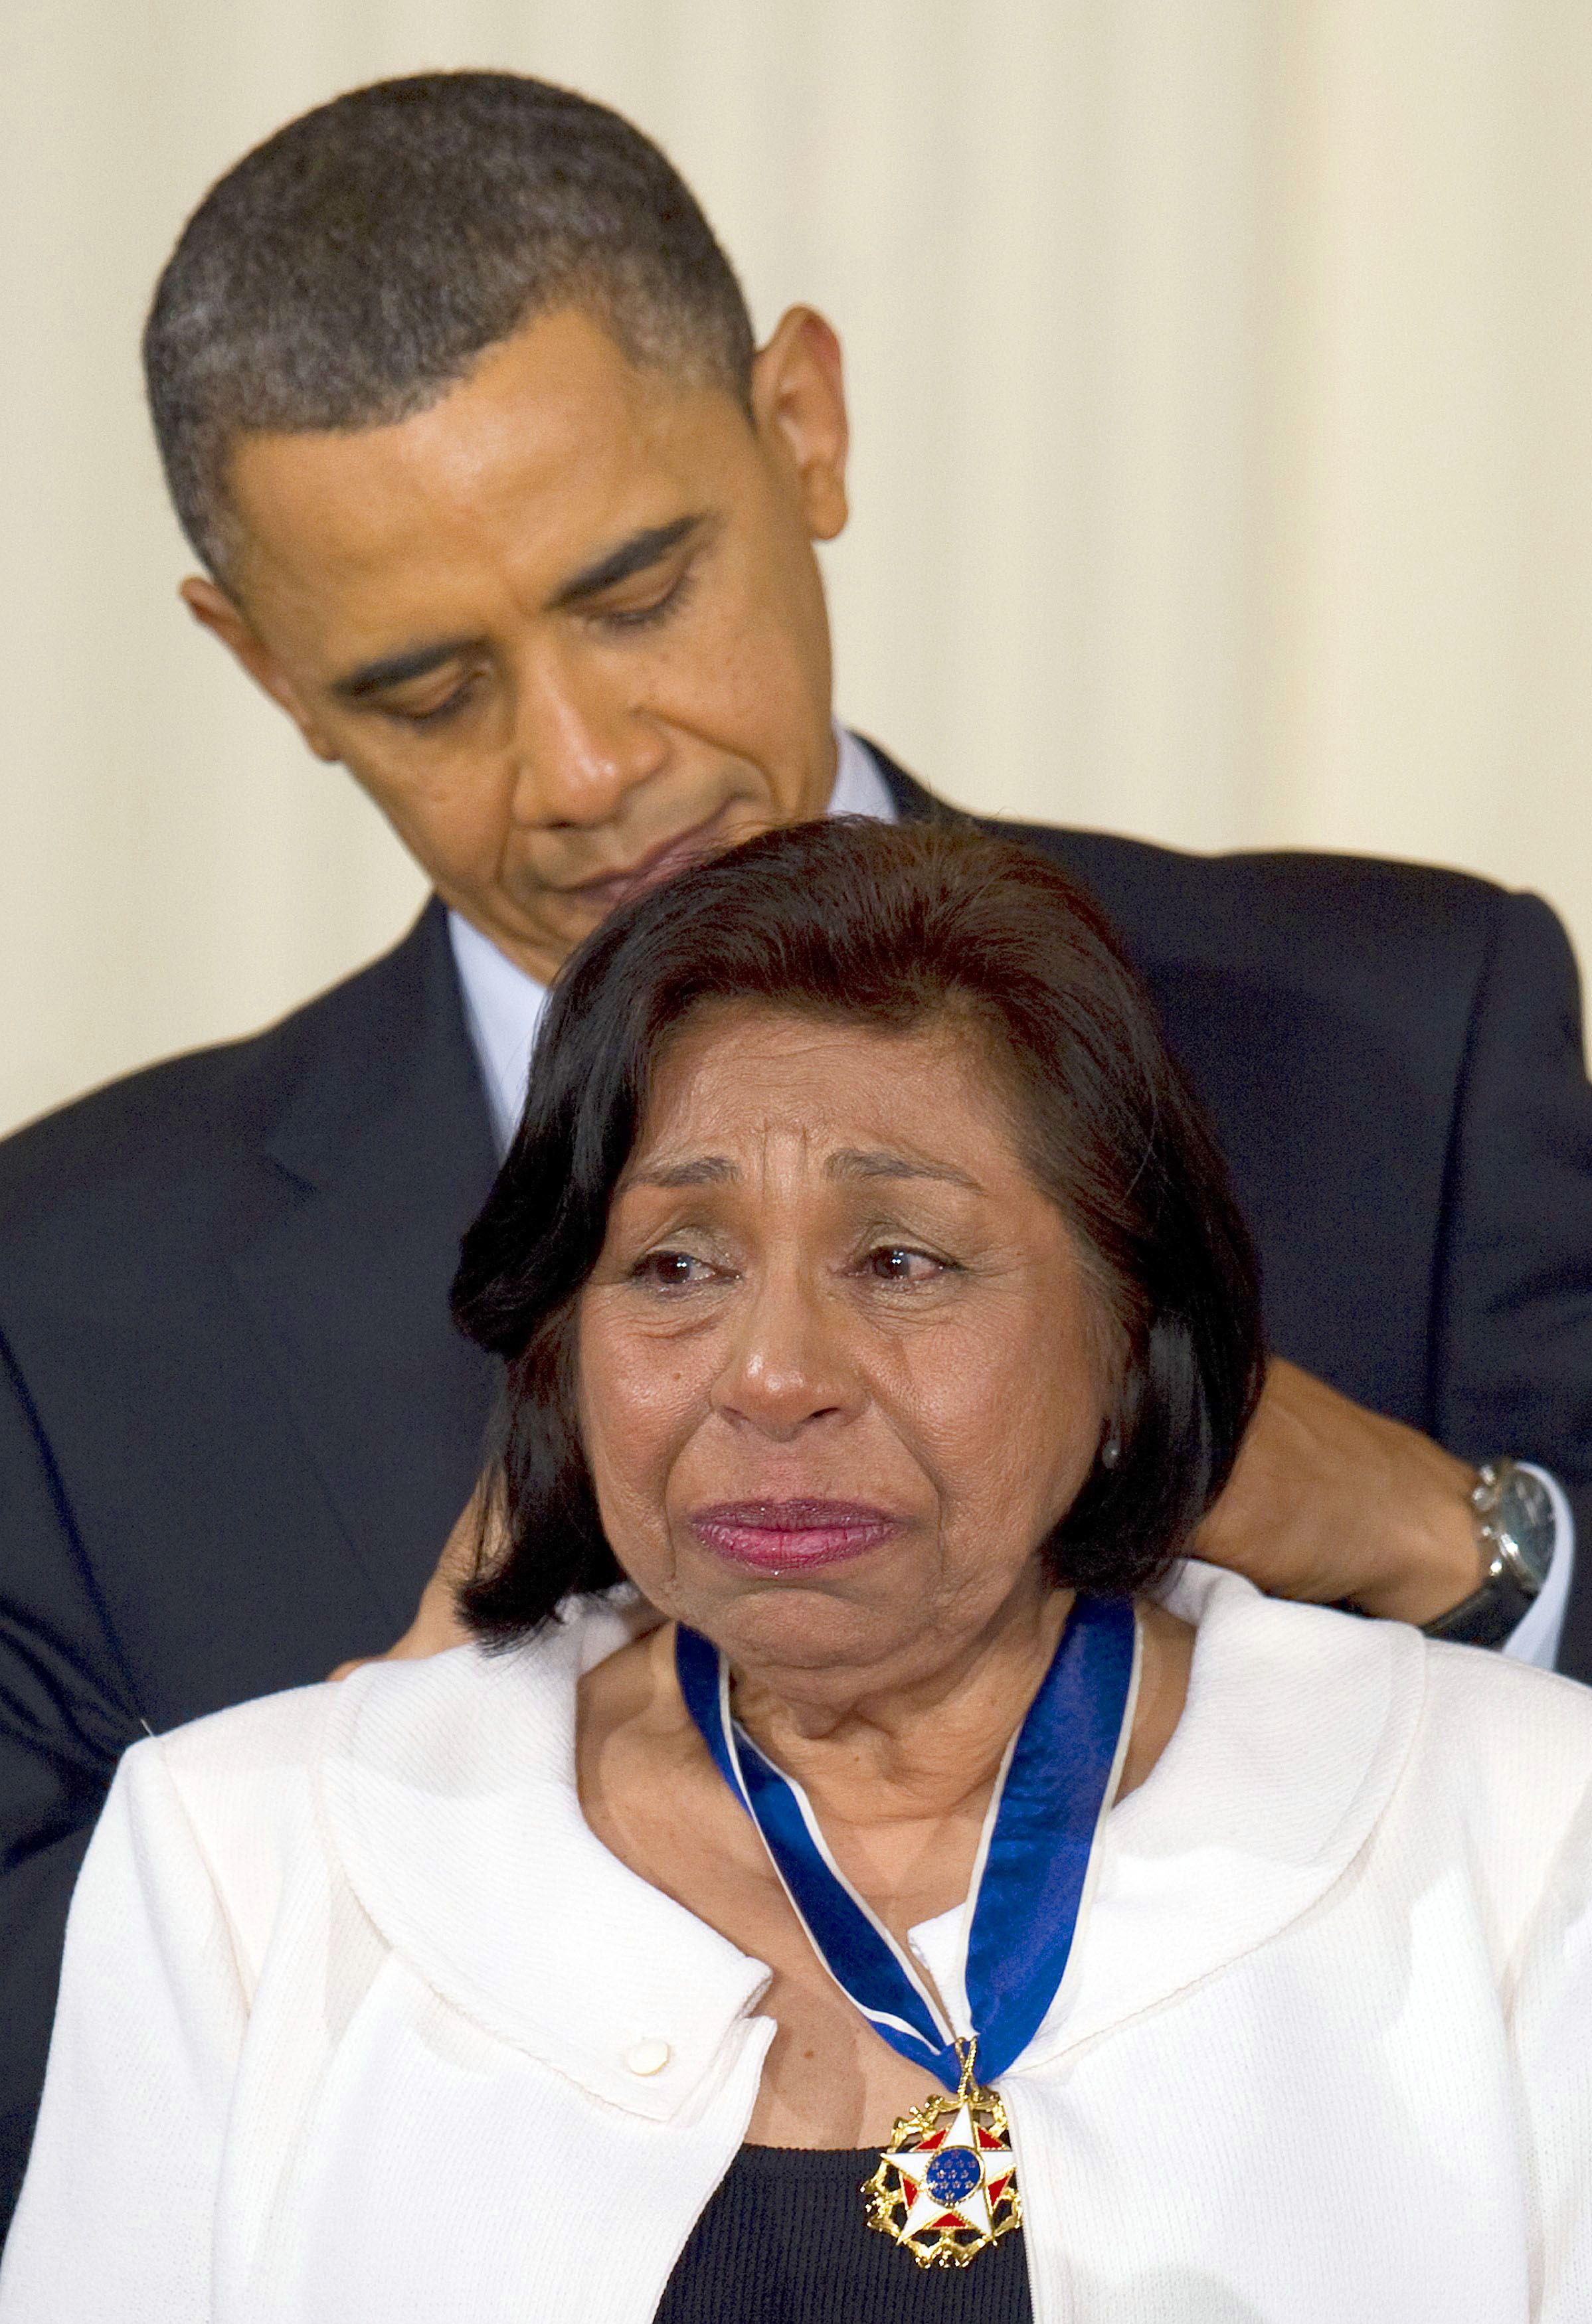 President Obama awards the 2010 Medal of Freedom to civil rights activist Sylvia Mendez during a 2011 ceremony at the White House in Washington, DC.